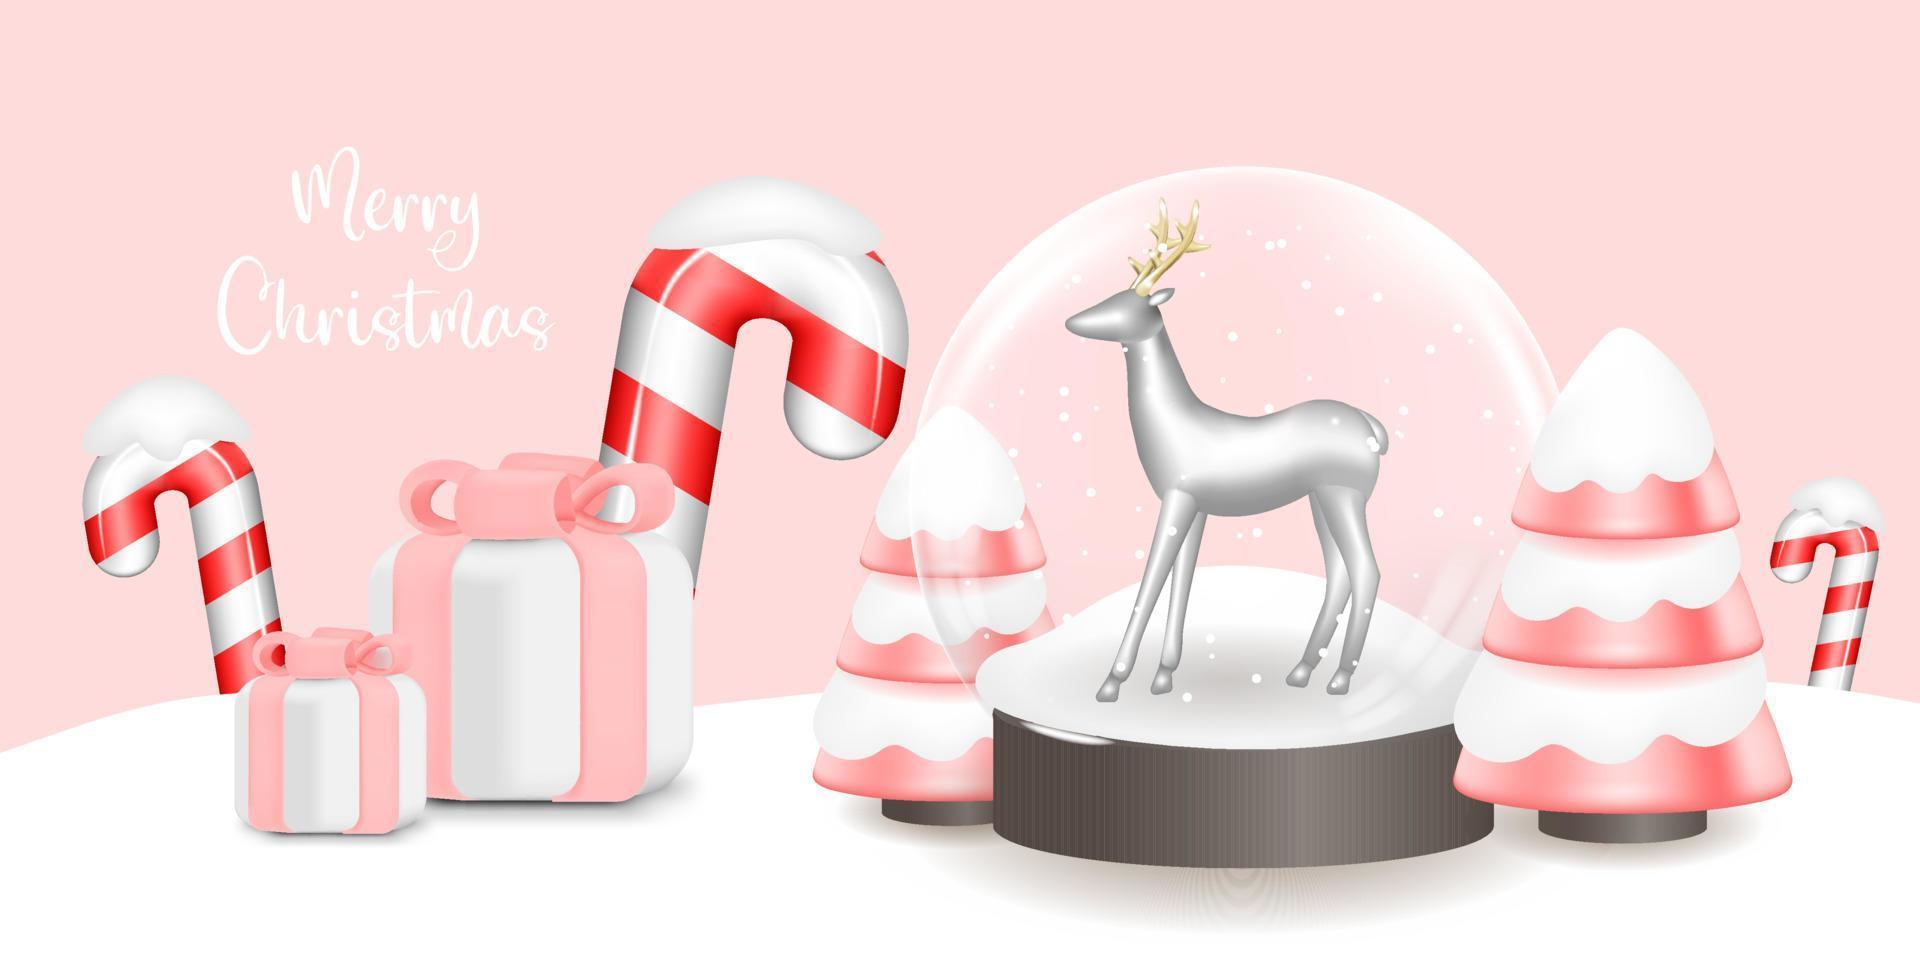 Christmas 3D Silver reindeer in a glass balloon vector illustration